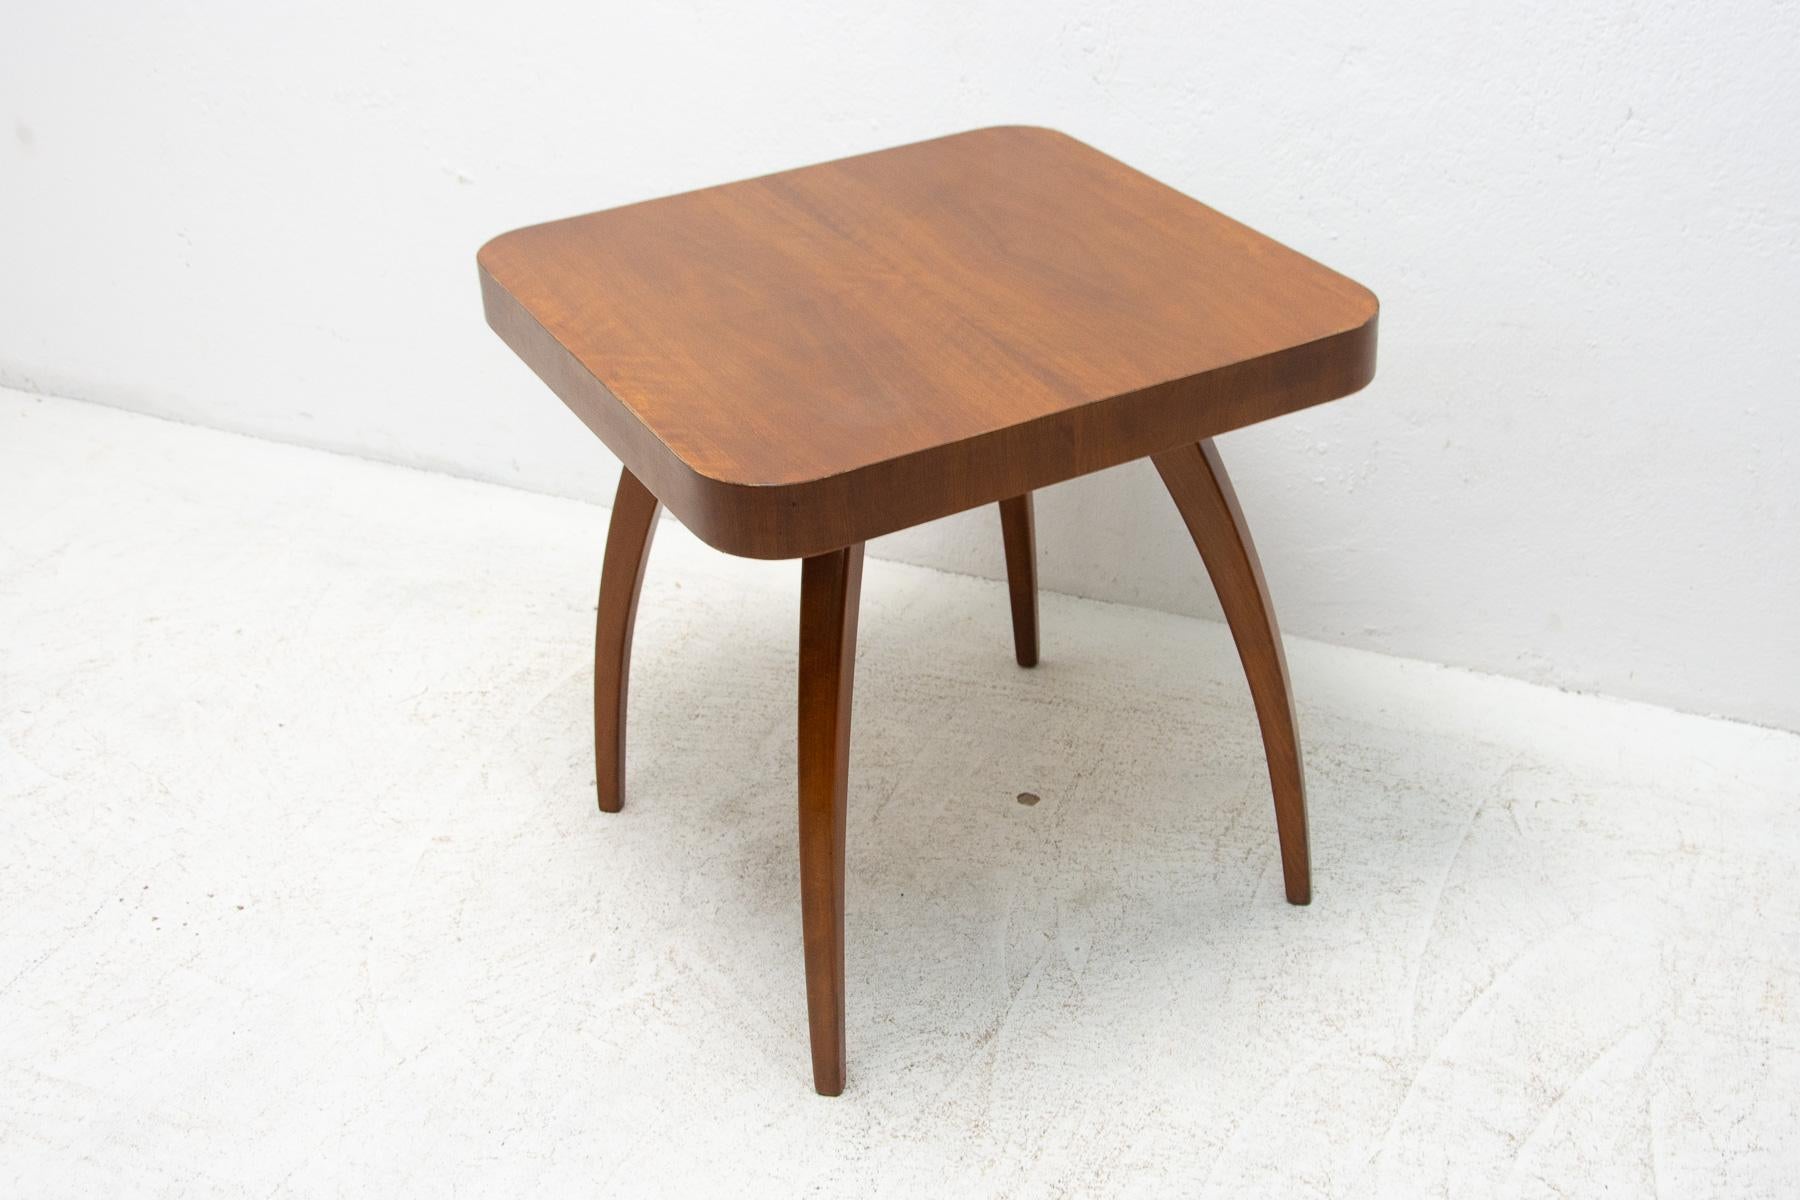 Bentwood Walnut Spider Table H-259 by Jindrich Halabala, 1950s, Czechoslovakia For Sale